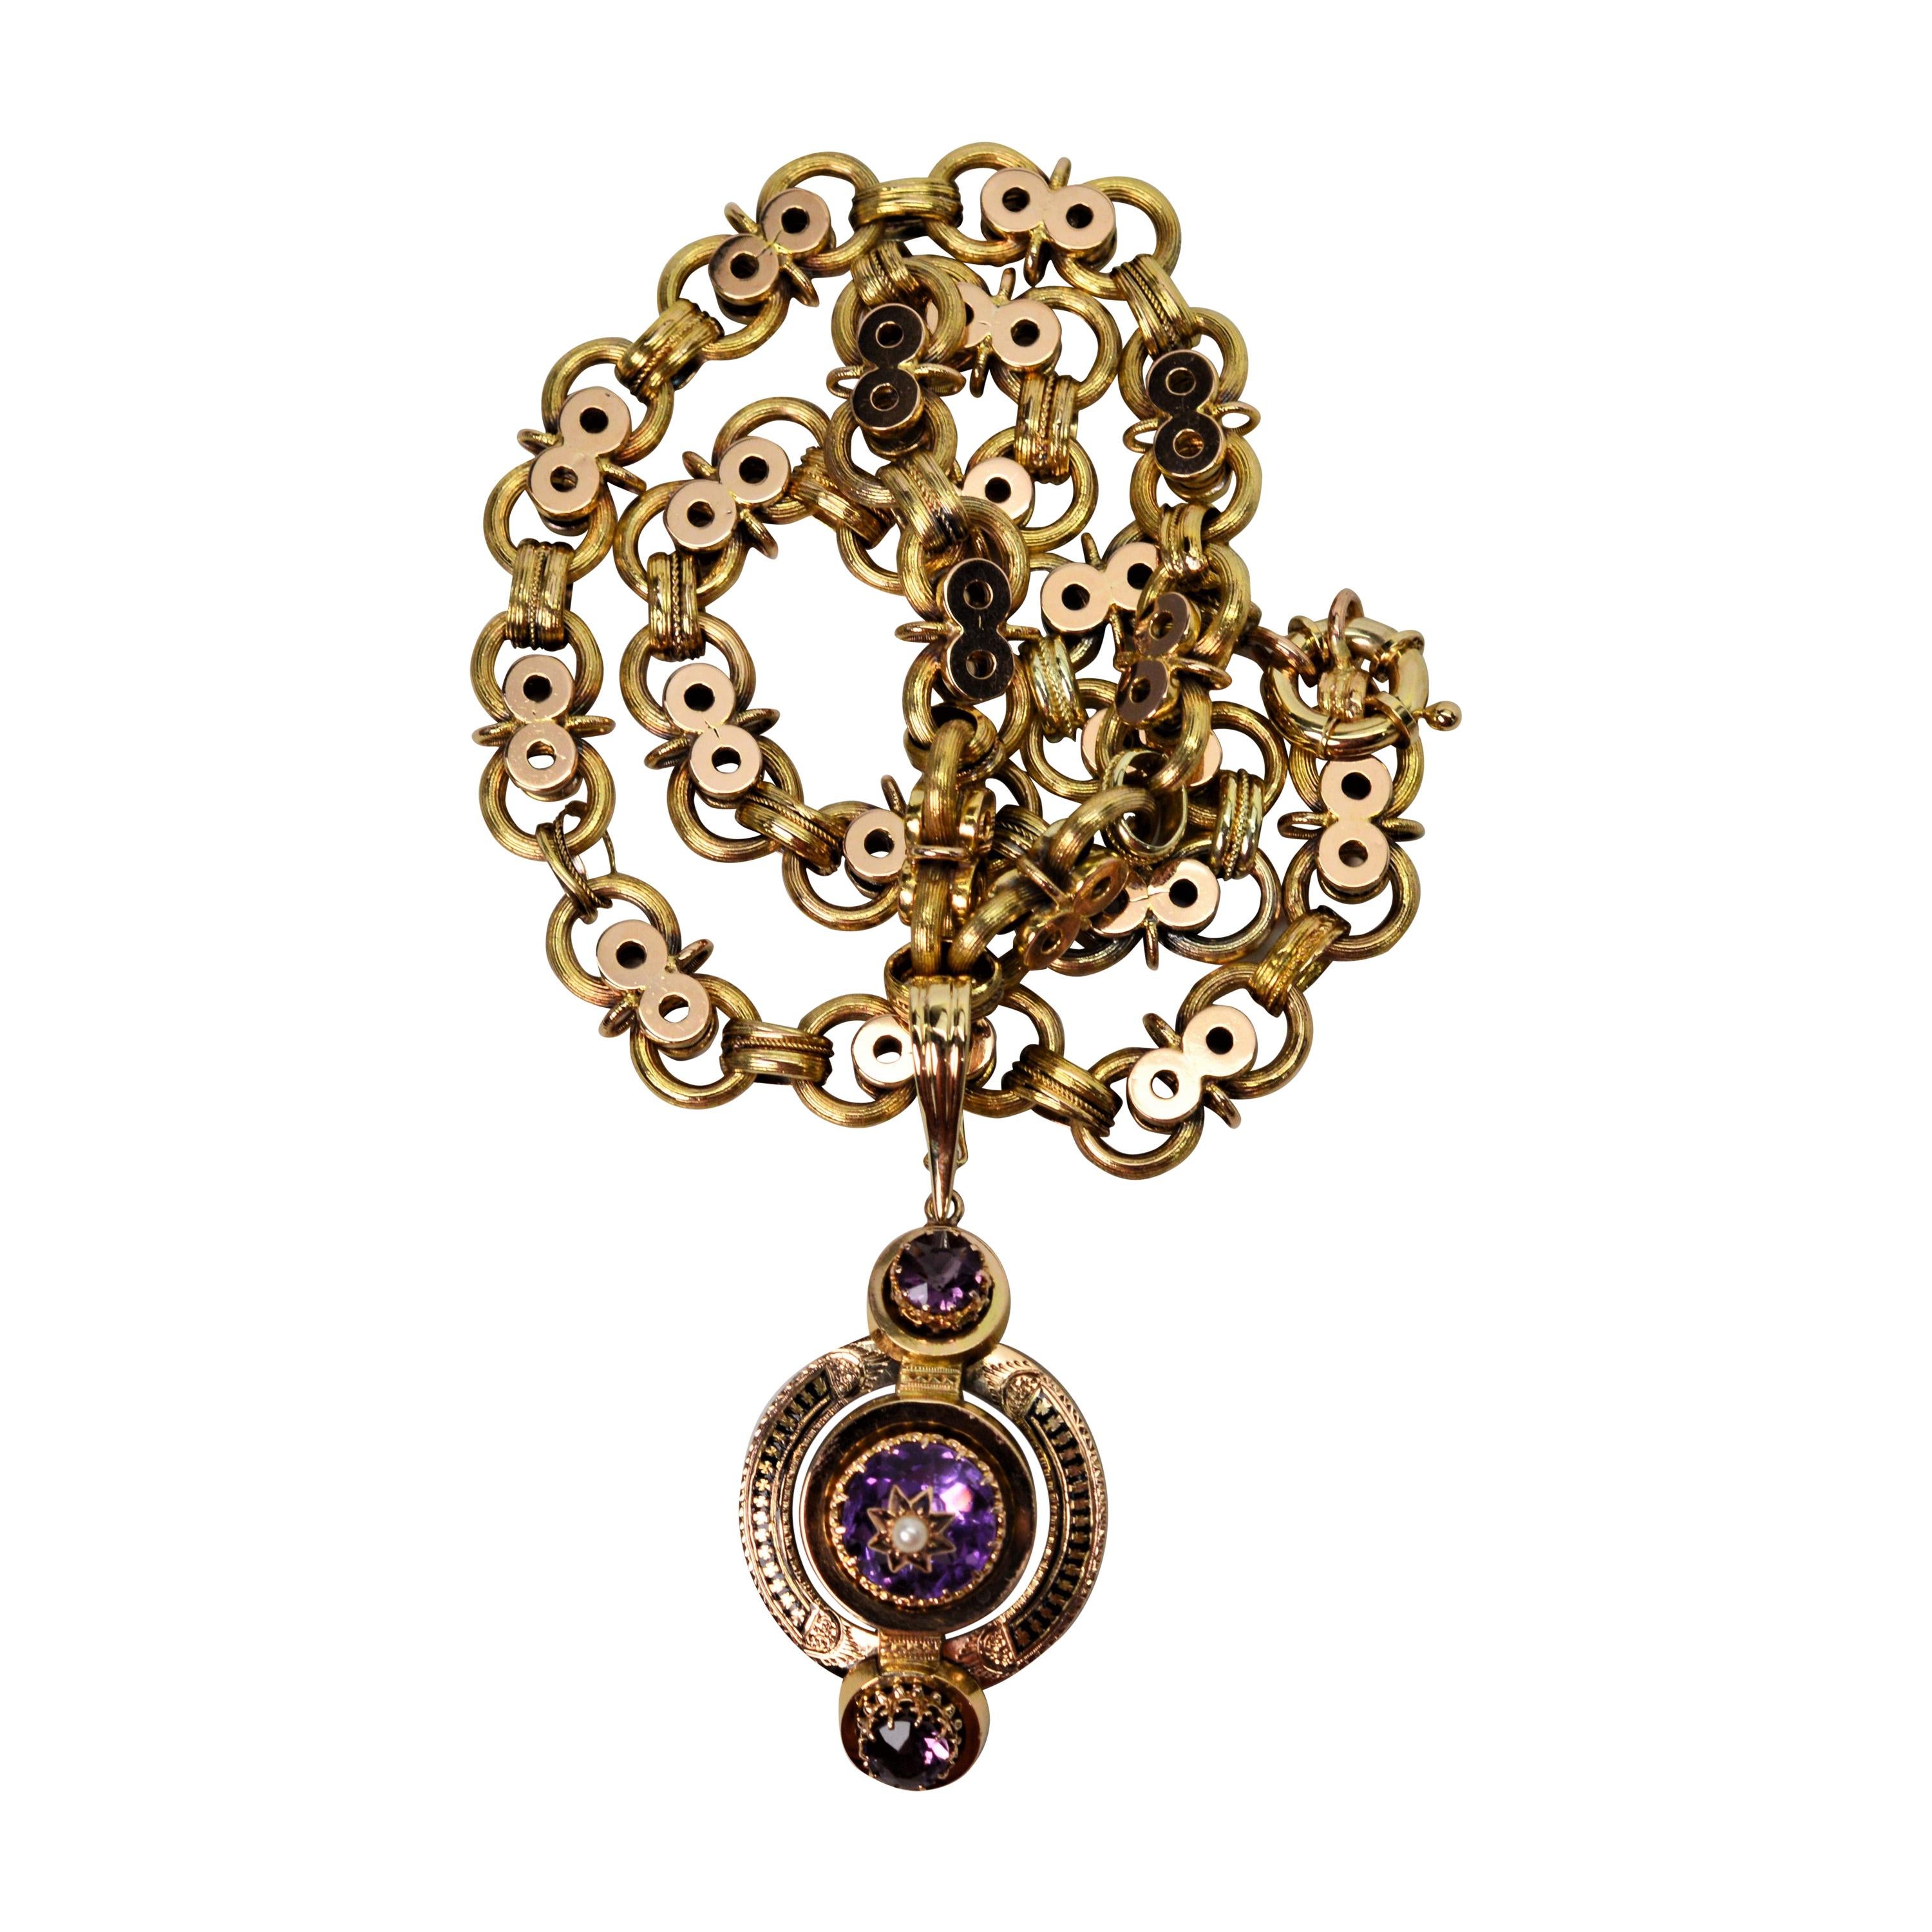 Antique Gold Necklace with Amethyst Pendant Enhancer For Sale